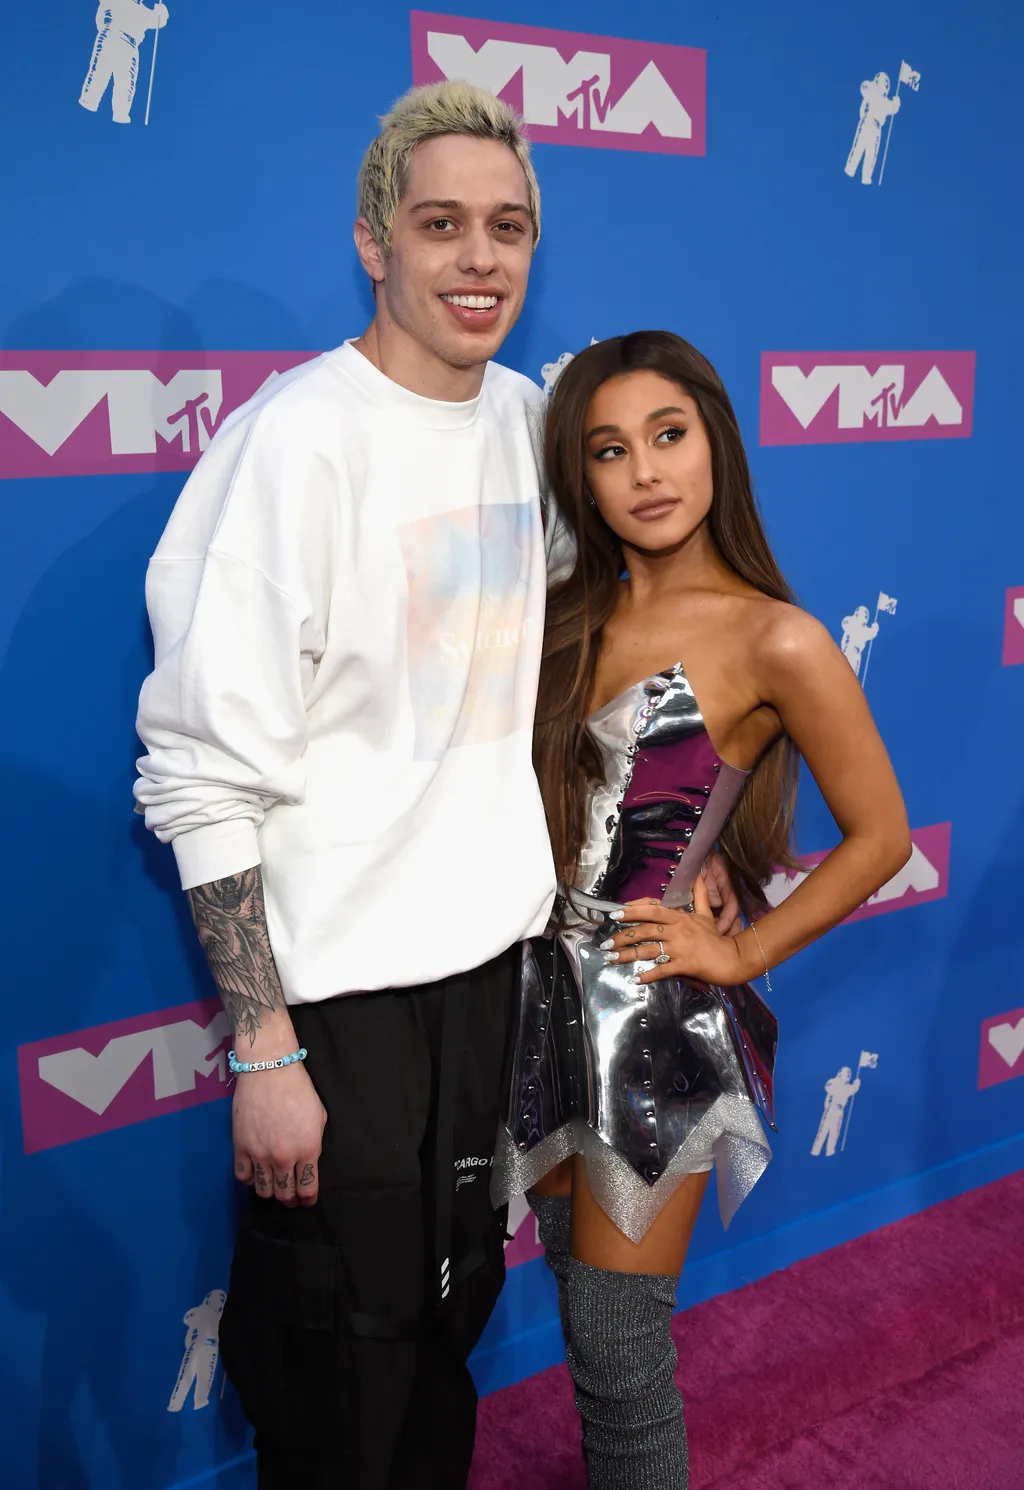 2018 MTV Video Music Awards - Red Carpet Arts Culture and Entertainment Celebrities Music Awards Ceremony Concert New York FeedRouted_NorthAmerica FeedRouted_Europe FeedRouted_Australasia attends the 2018 MTV Video Music Awards at Radio City Music Hall on